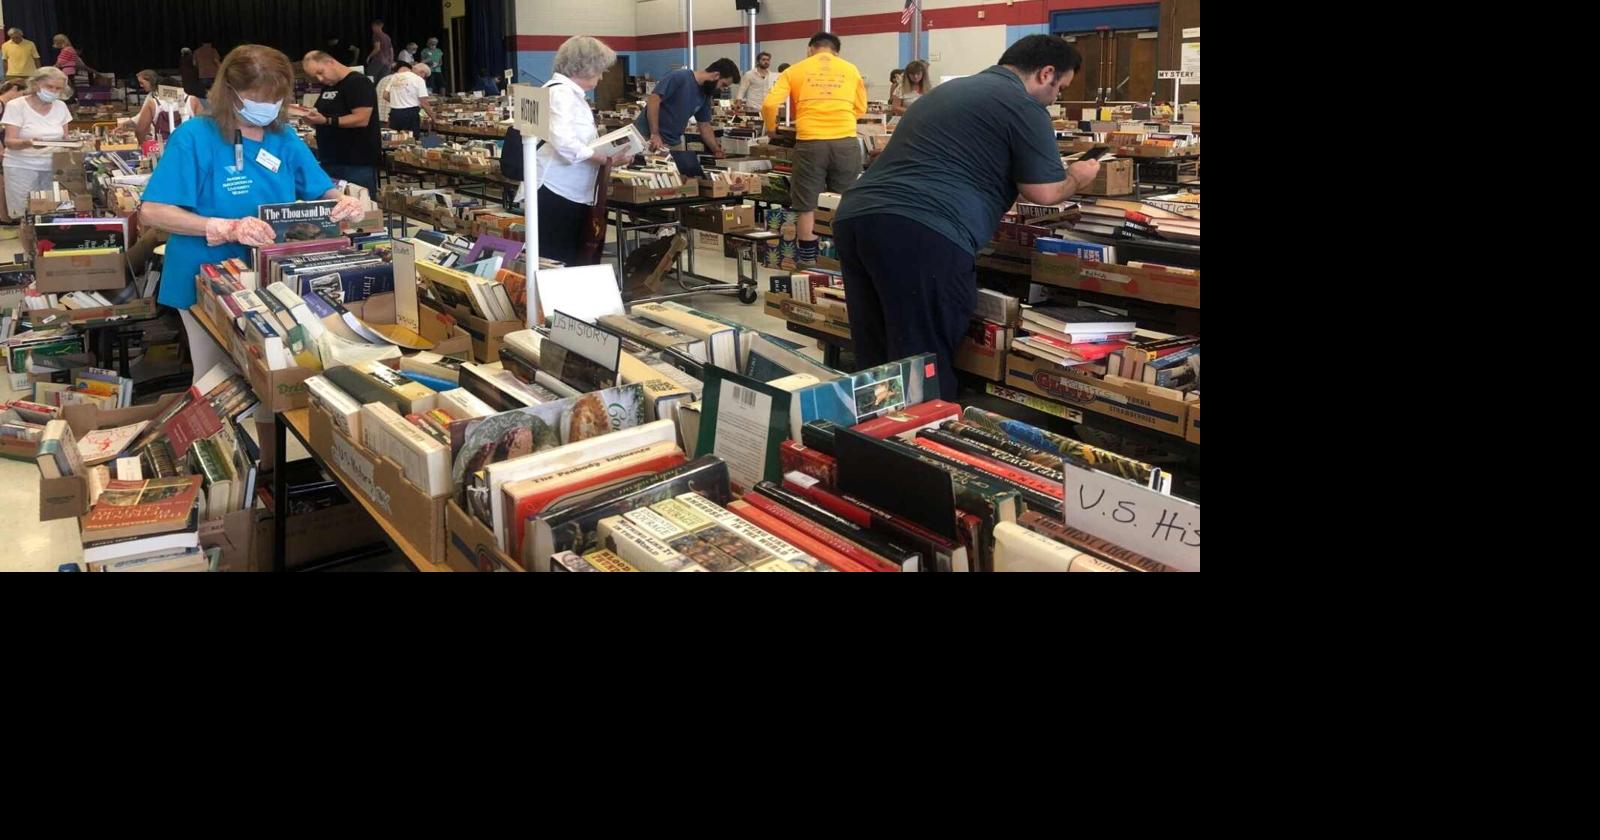 South Carolina: Book removed from middle school book fair